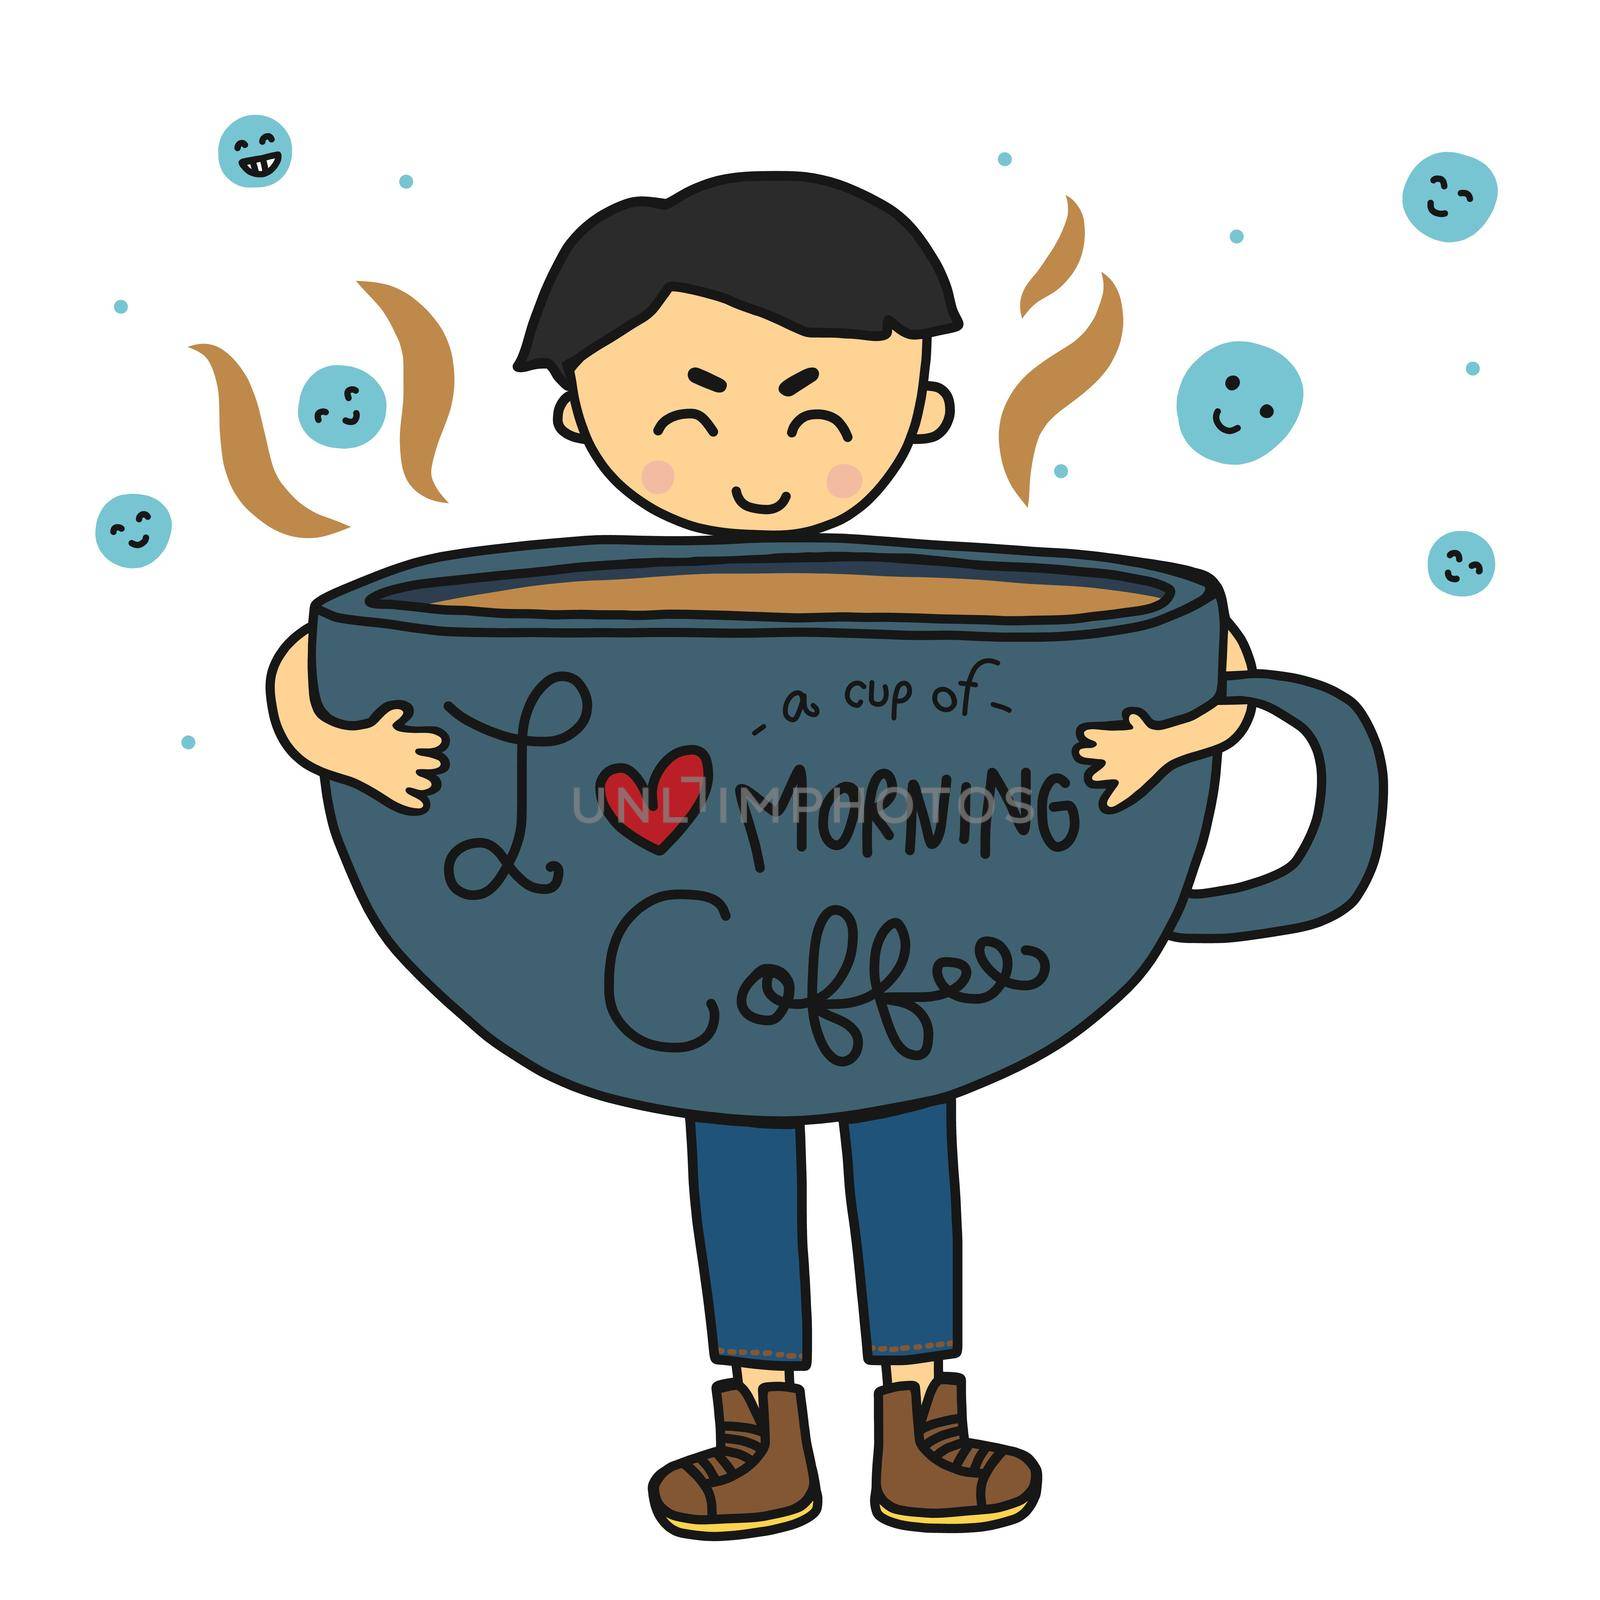 Man with big I love a cup of morning coffee cartoon doodle vector illustration